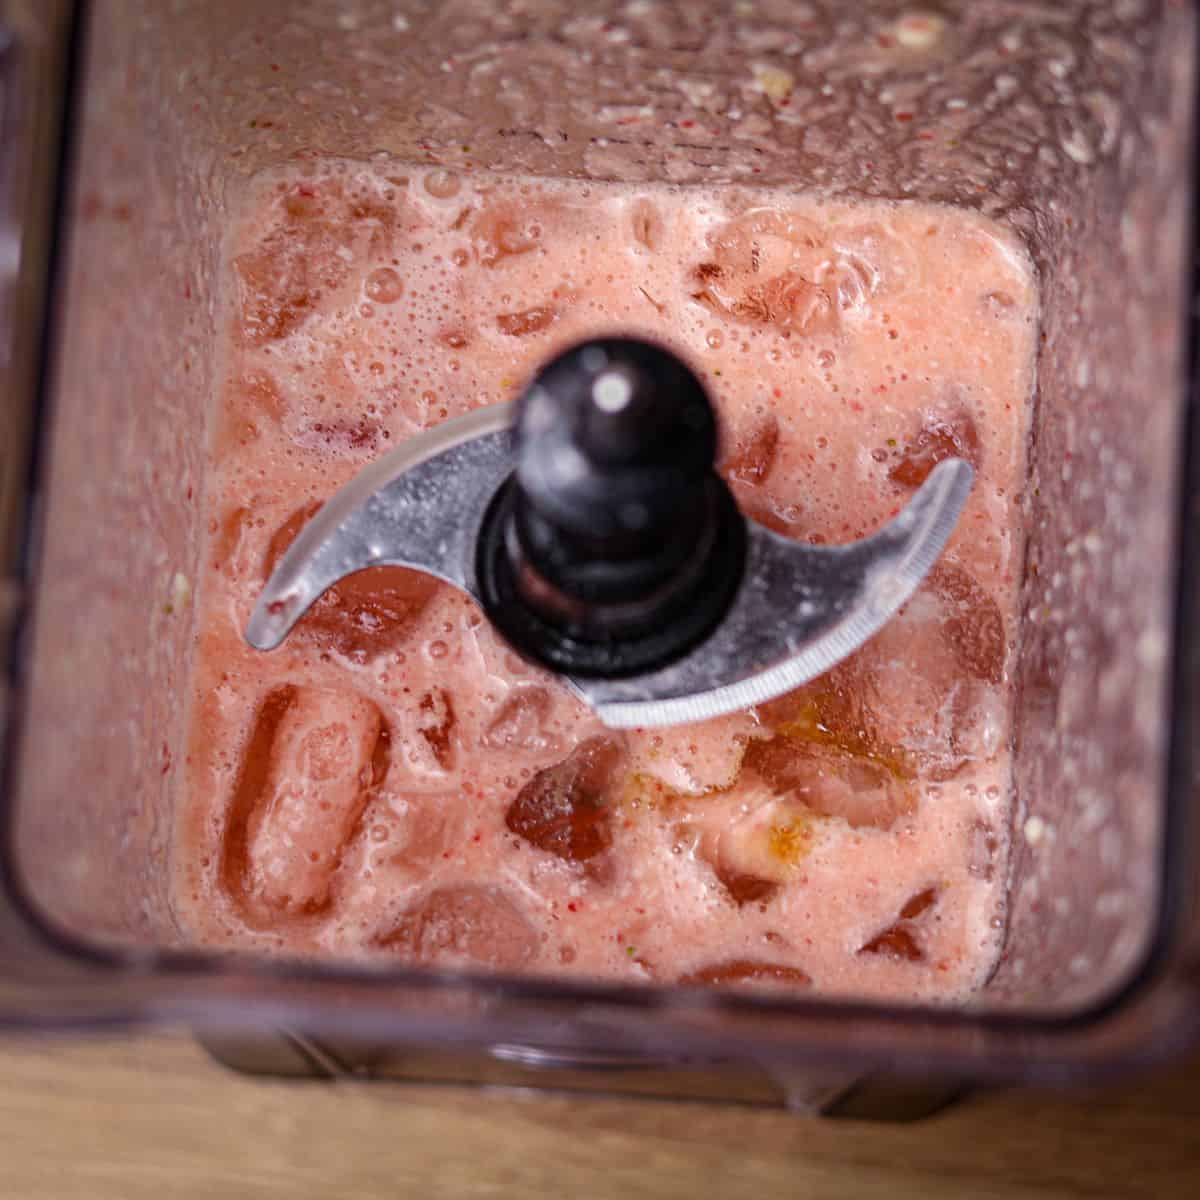 Top-down image of a blender showing a blended pink smoothie with ice cubes on top, ready for the final blend.